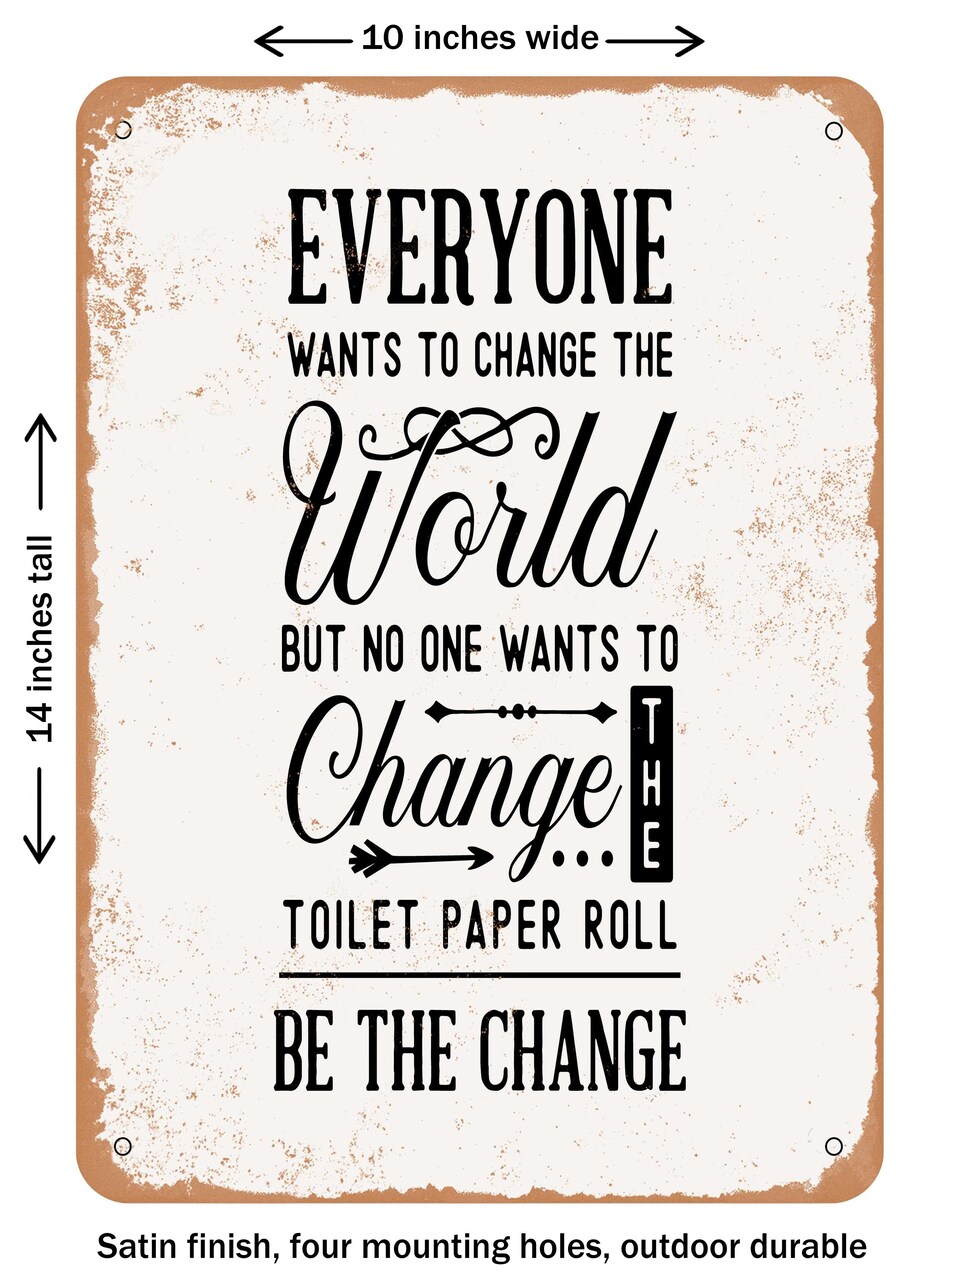 DECORATIVE METAL SIGN - Everyone Wants to Change the World But No One  - Vintage Rusty Look